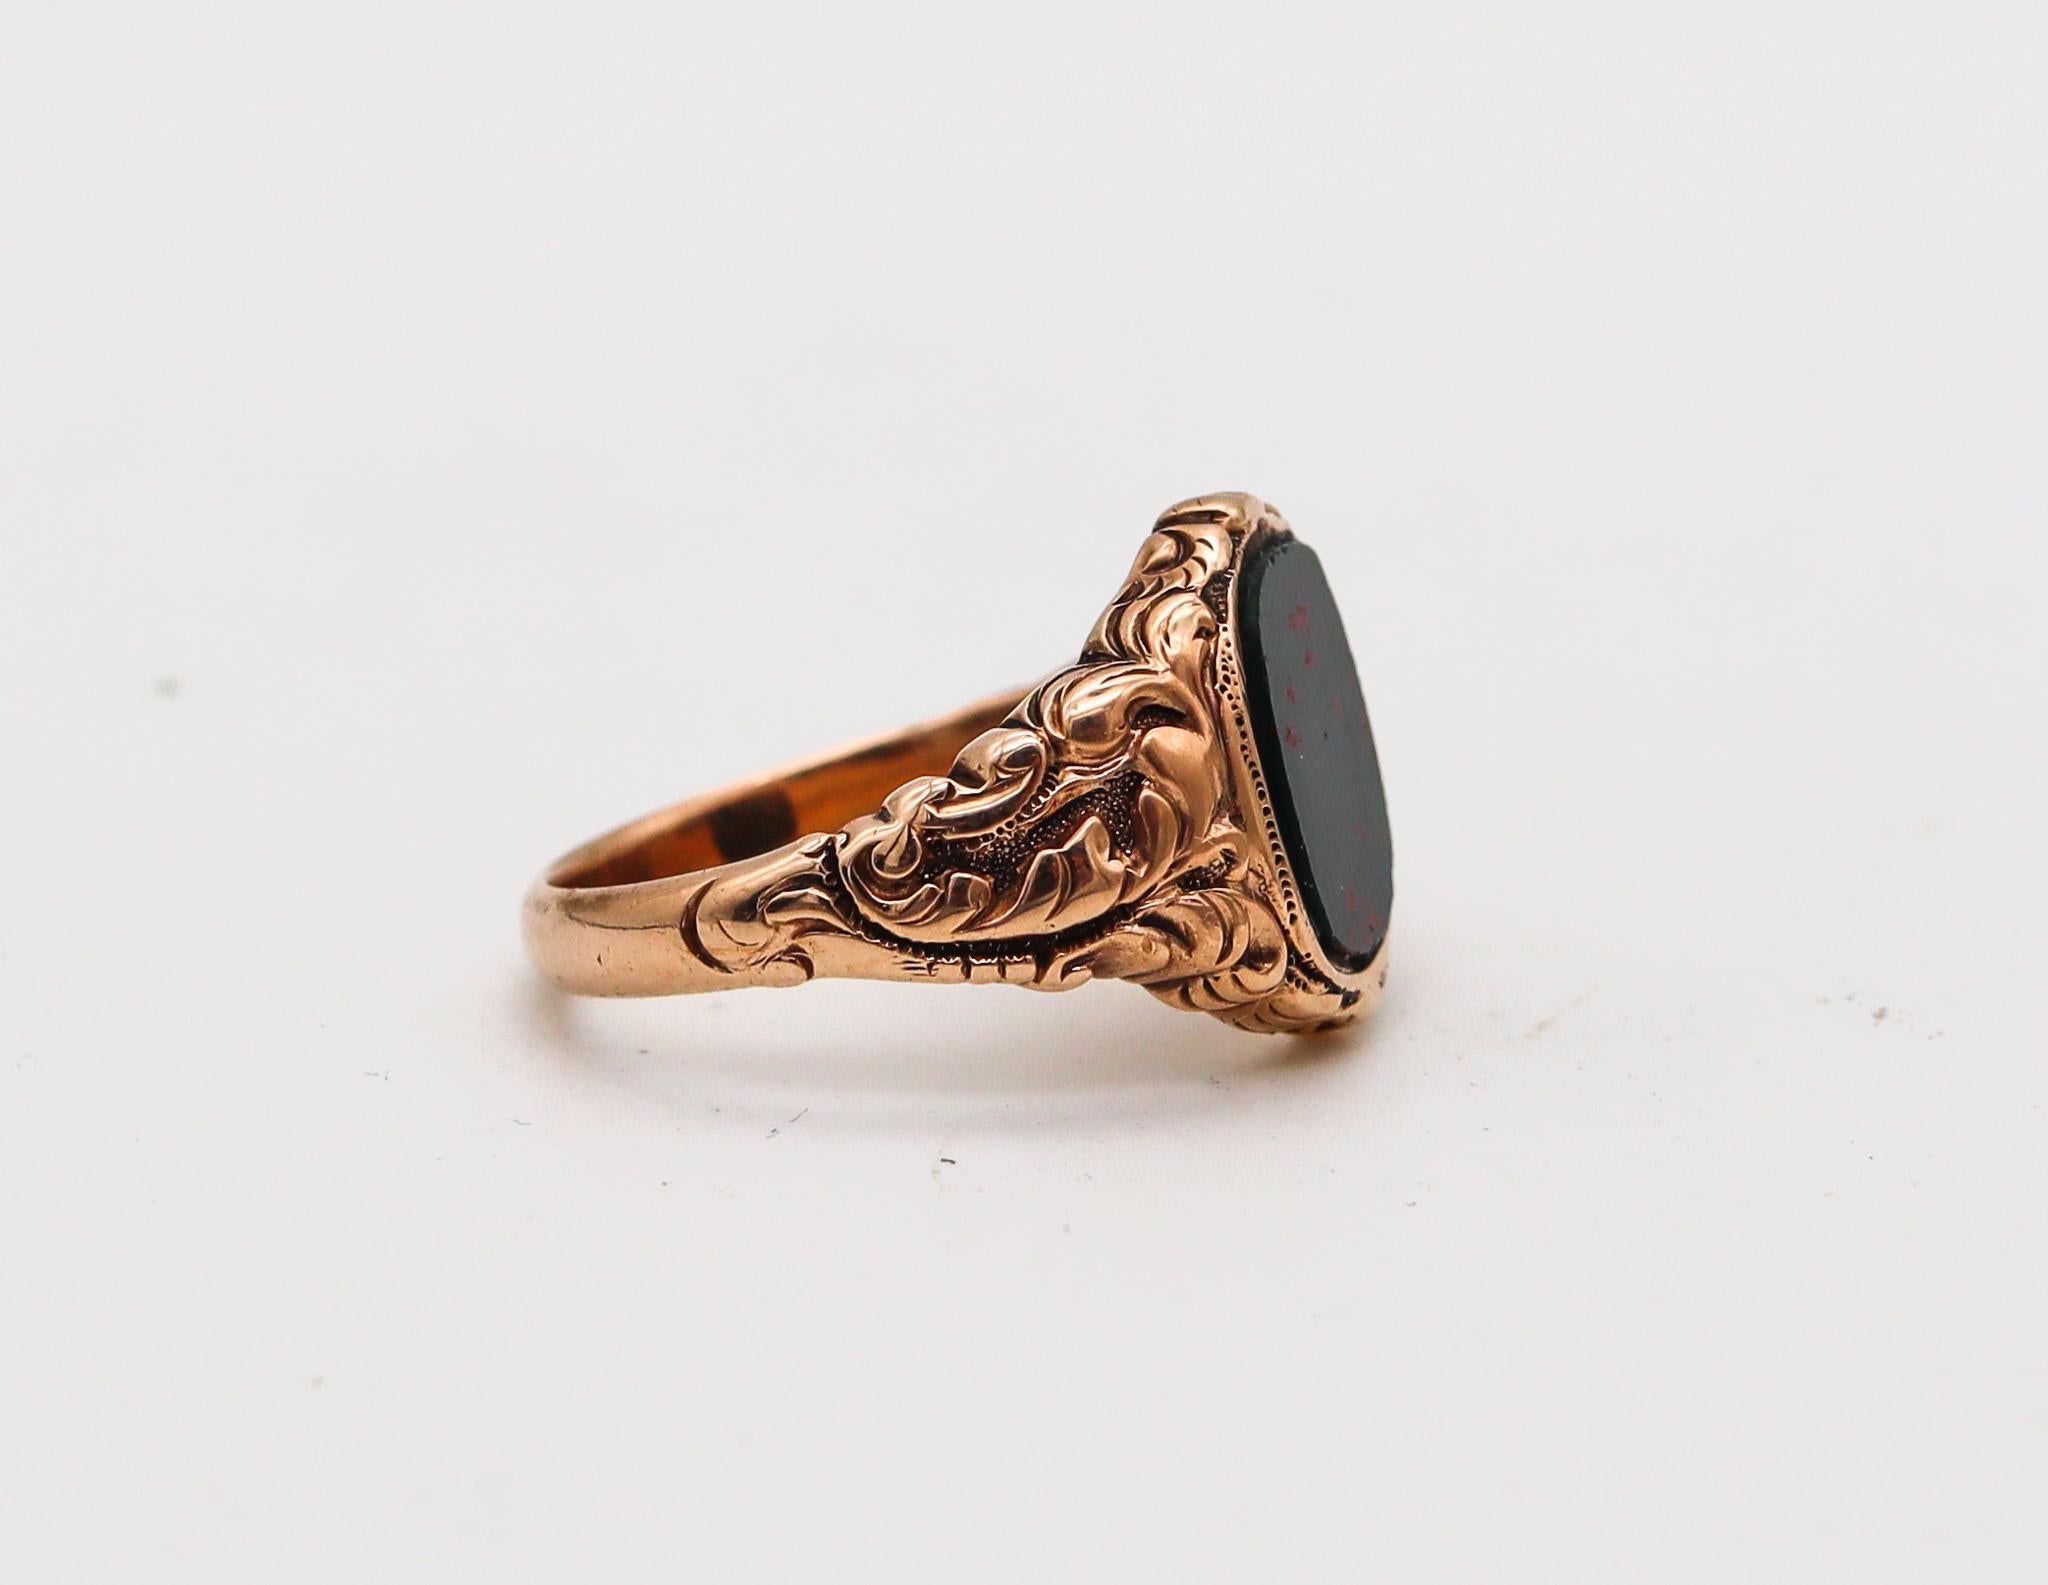 Allsopp-Steller 1900 Art Nouveau Signet Ring In 18Kt Gold With Oval Bloodstone In Excellent Condition For Sale In Miami, FL